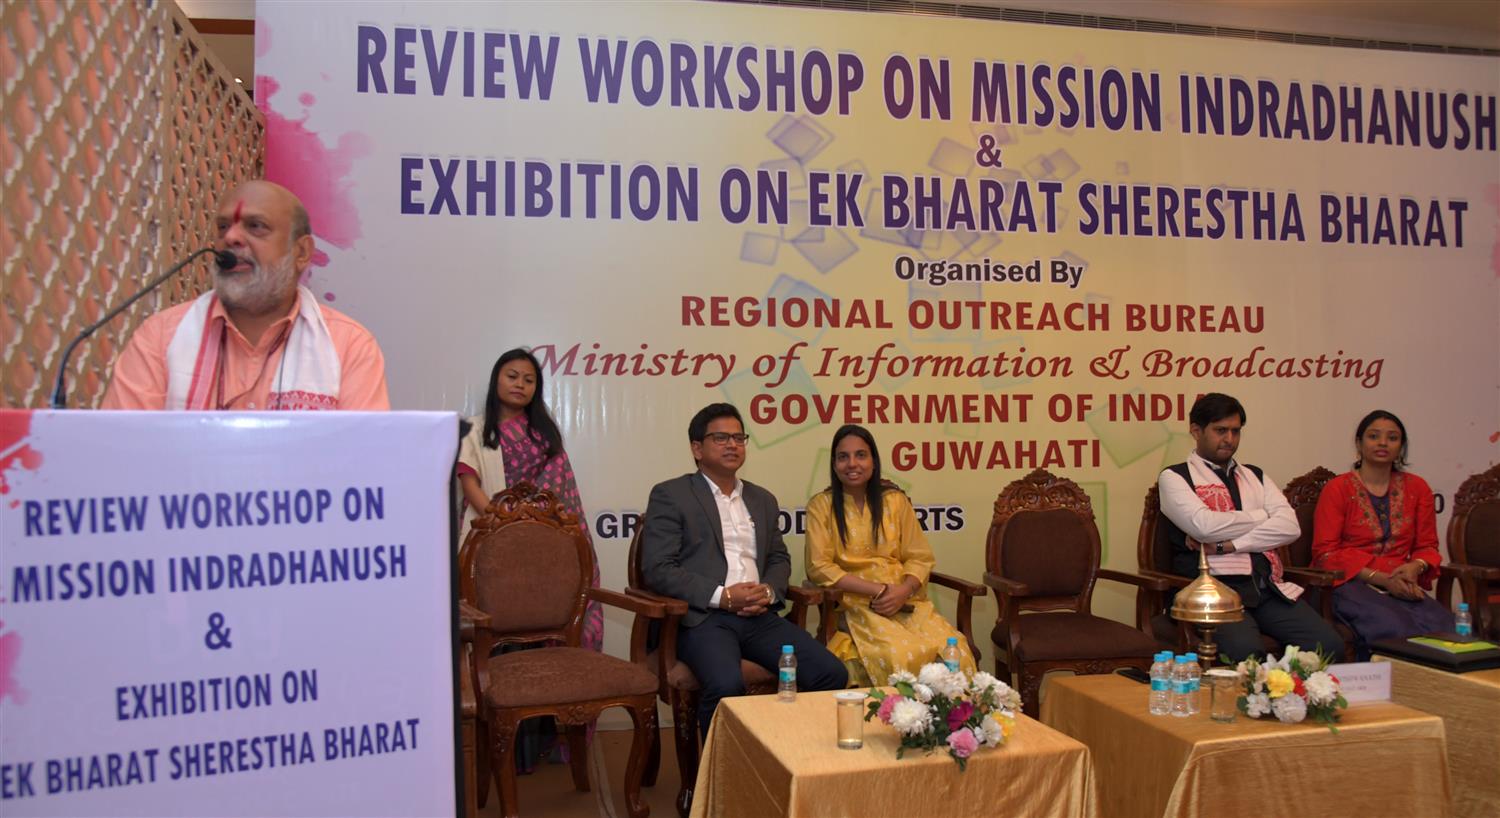 Shri L R Vishwanath, Director General, Ministry of Information & Broadcasting NEZ  delivering  speech  at   Review Workshop on Mission Indradhanush 2.0 organized by Regional Outreach Bureau, Government of India  Guwahati on 28th February 2020.